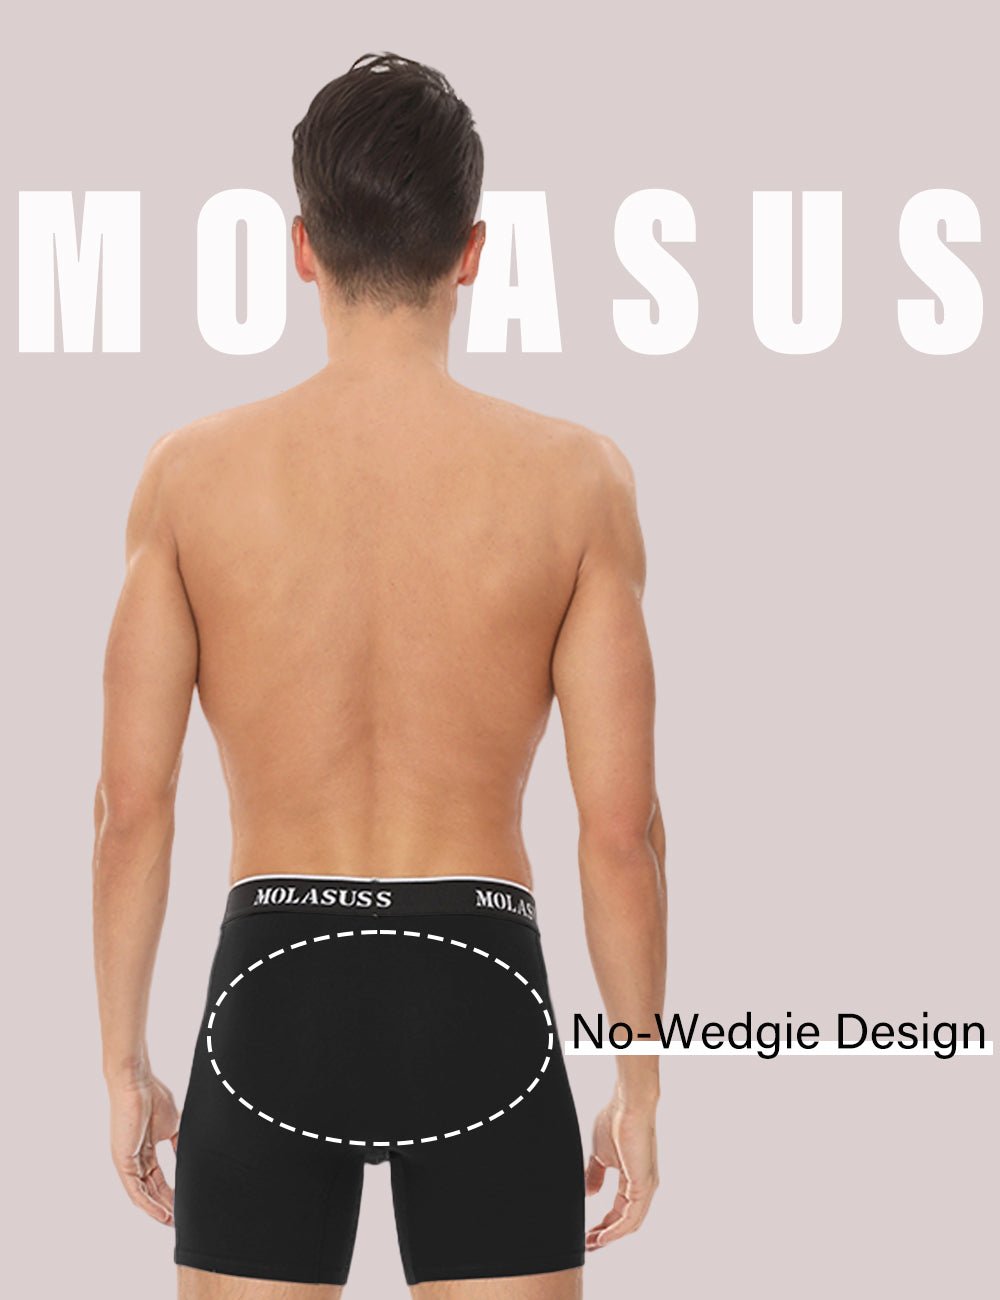 Molasus Mens Cotton Stretch Trunks Underwear No Fly Tagless Underpants Pack  of 5 (3 Grey+2 Black)